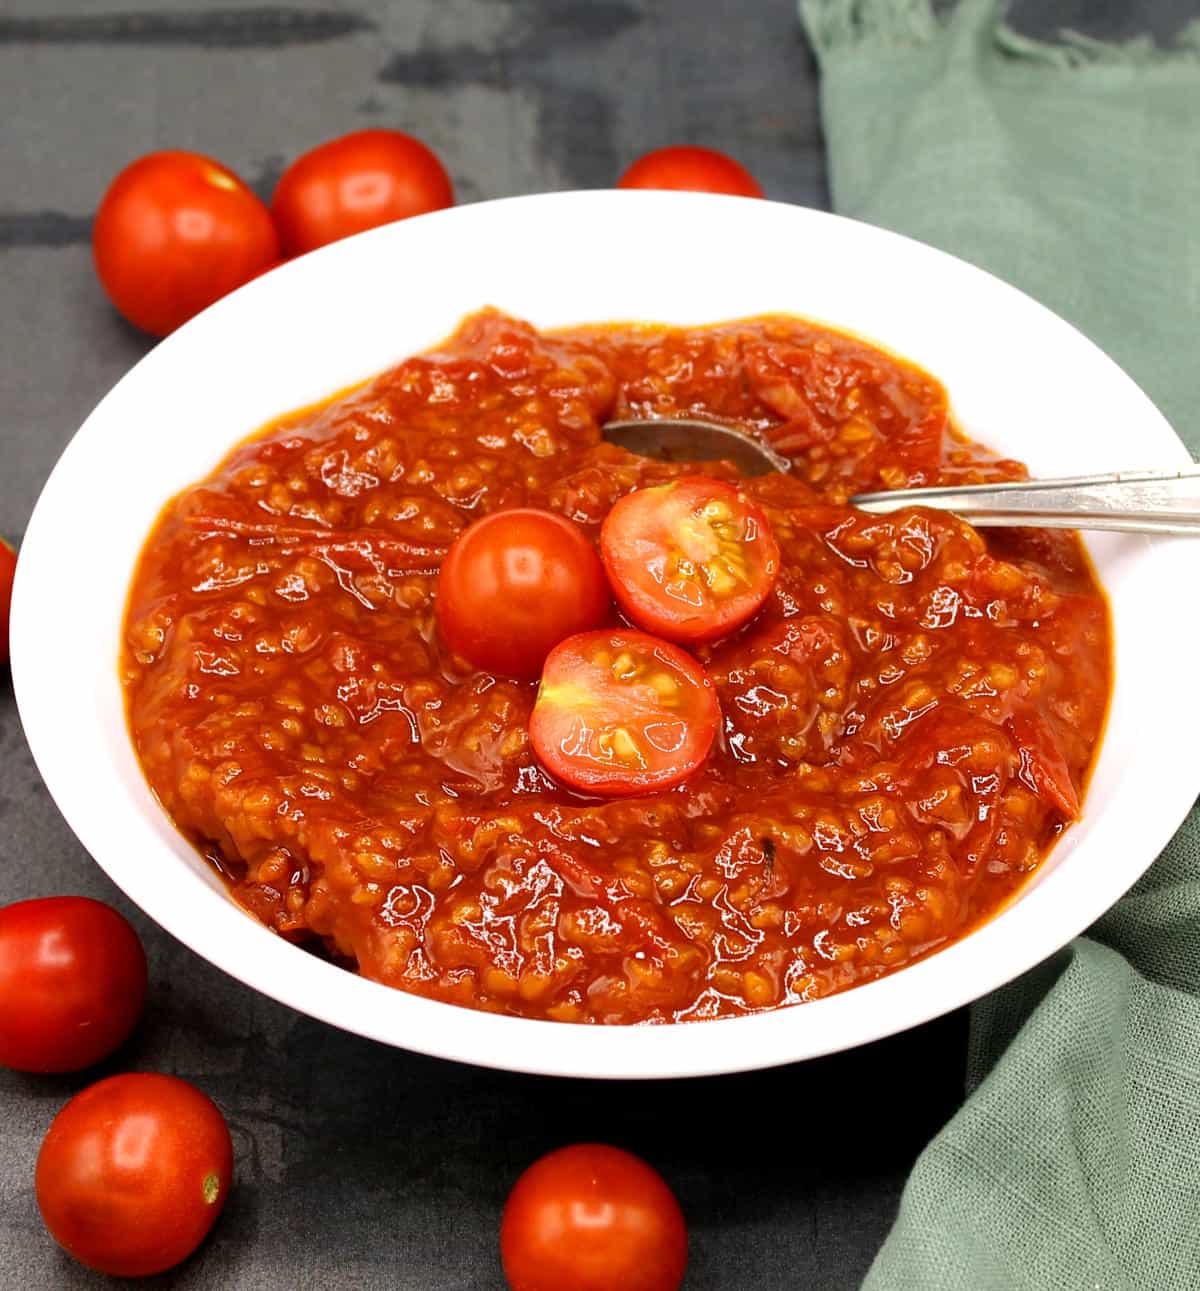 Tomato compote in white bowl with cherry tomatoes and spoon.